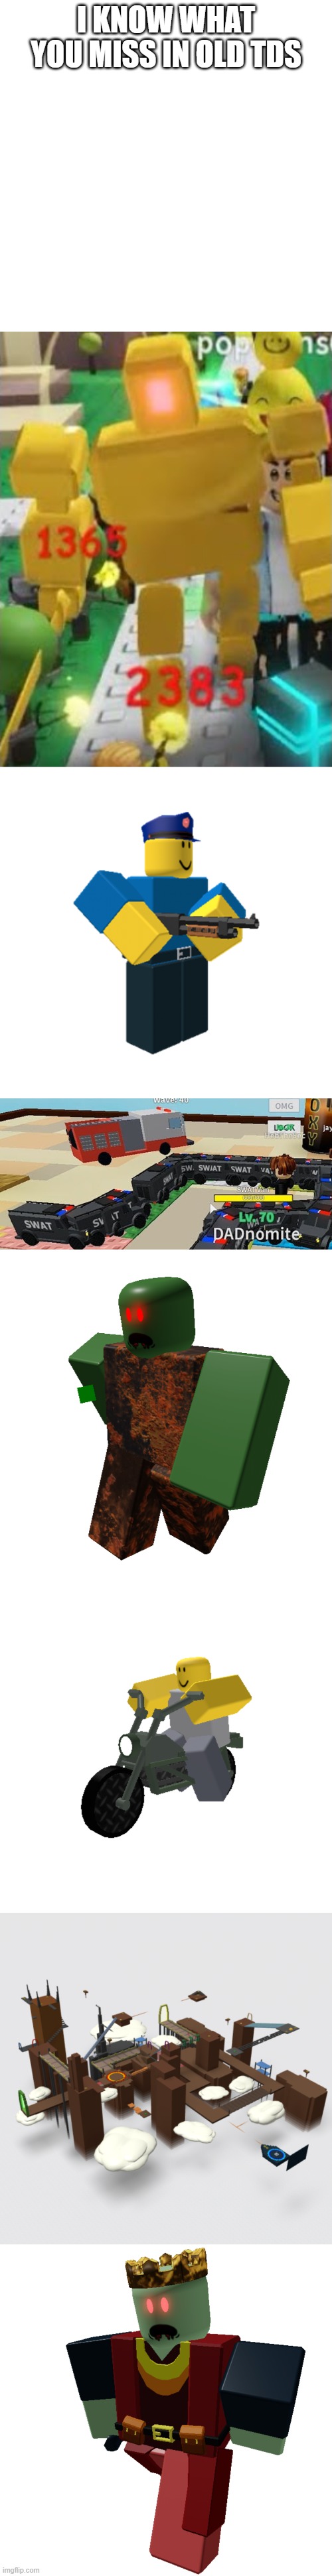 tds meme | I KNOW WHAT YOU MISS IN OLD TDS | image tagged in memes,blank transparent square,tds,roblox meme,tower defense | made w/ Imgflip meme maker